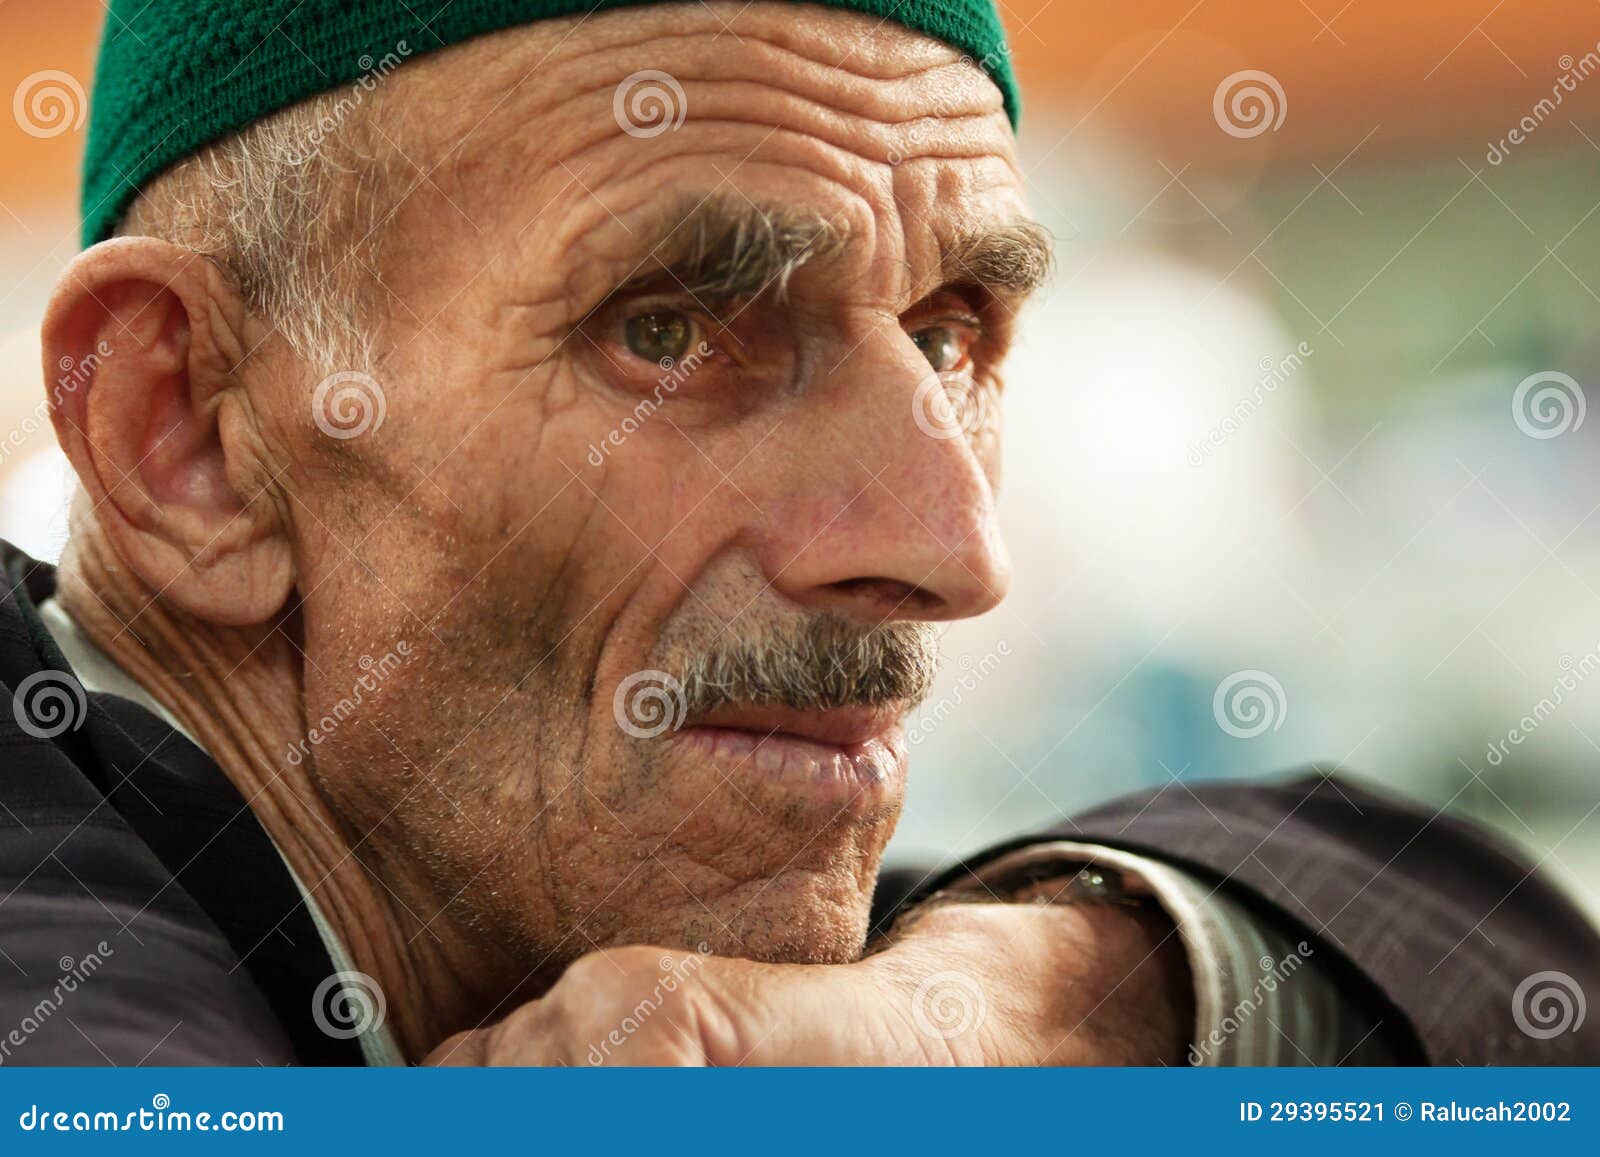 Moslem Old Man Editorial Photo Image Of Dried Moslem 29395521 